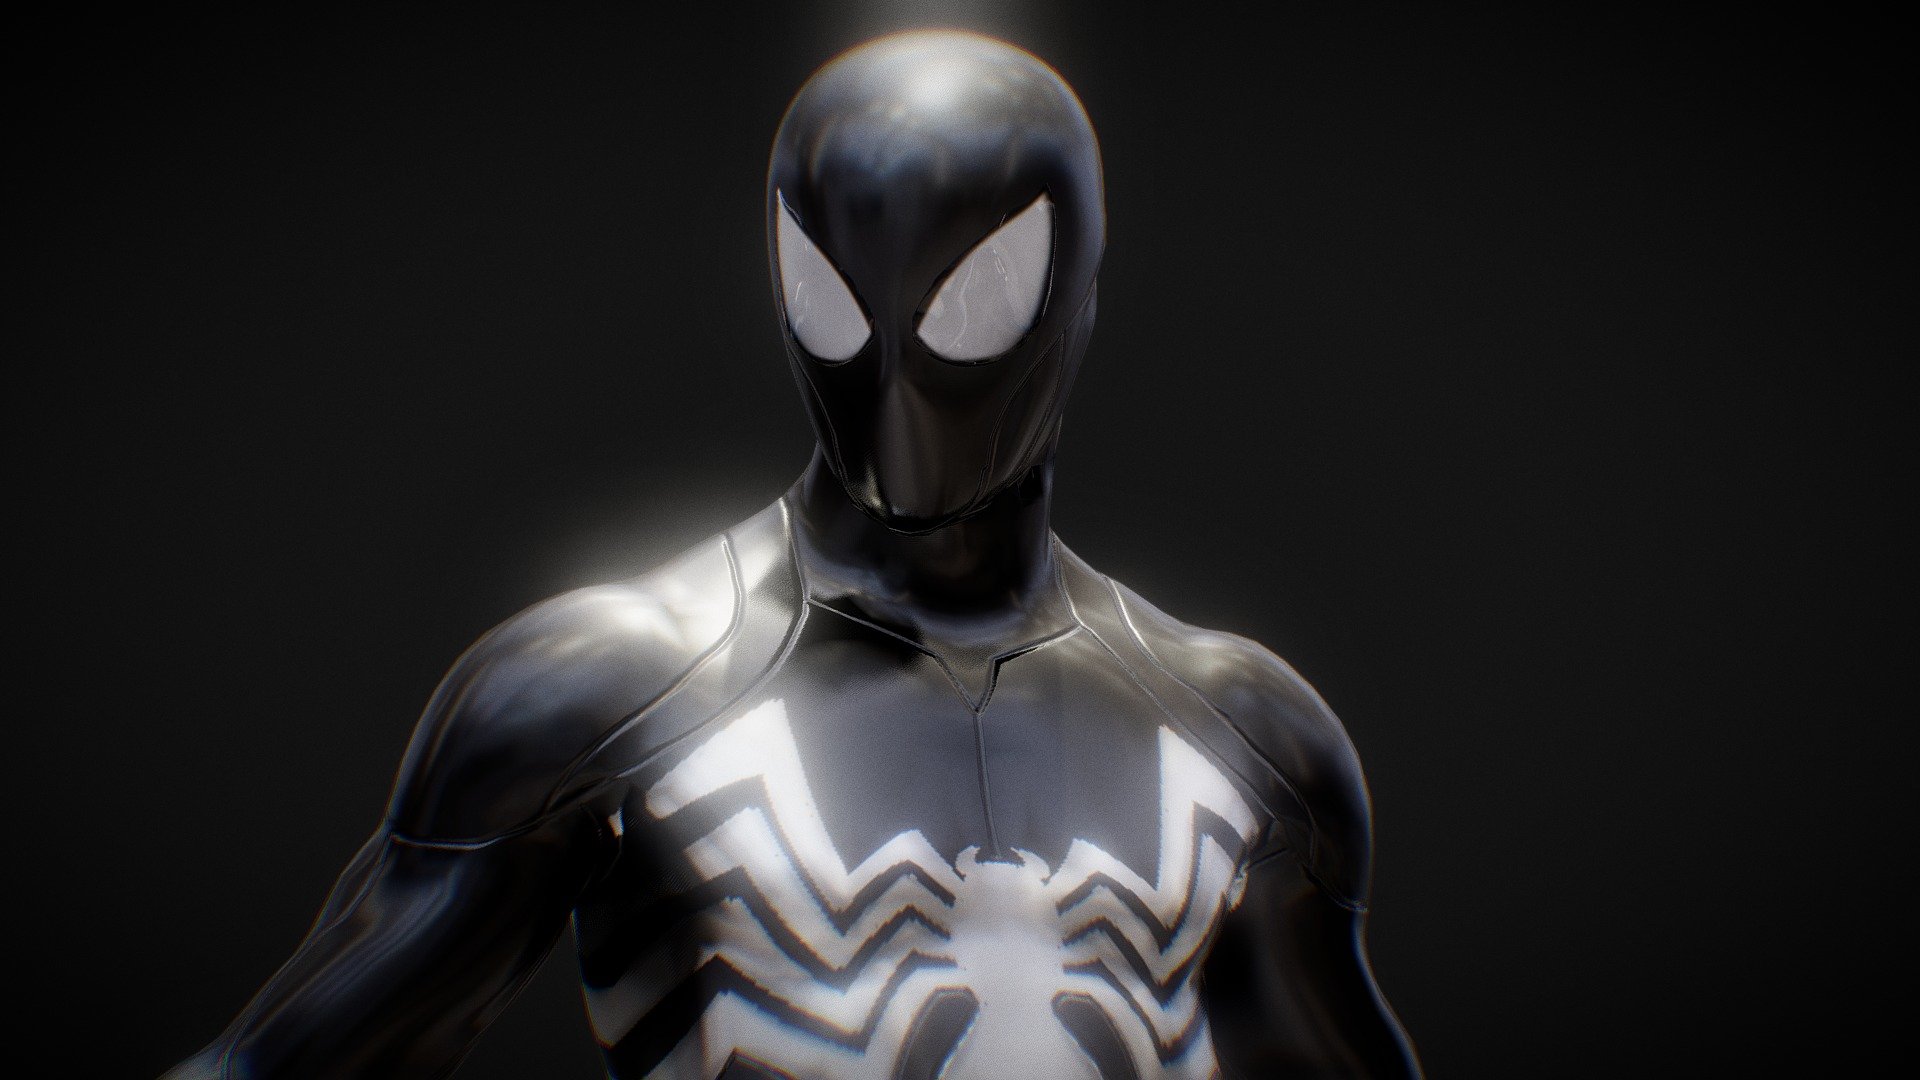 Spider-Man Symbiote suit from the Spider-Man 2 PS5 game :D

Rigged

Textured

The Blend File Since The Previous FBX model have no texture in there
hope you like it :D - Spider-Man Symbiote Spider-Man 2 PS5 Blend - Download Free 3D model by CVRxEarth 3d model